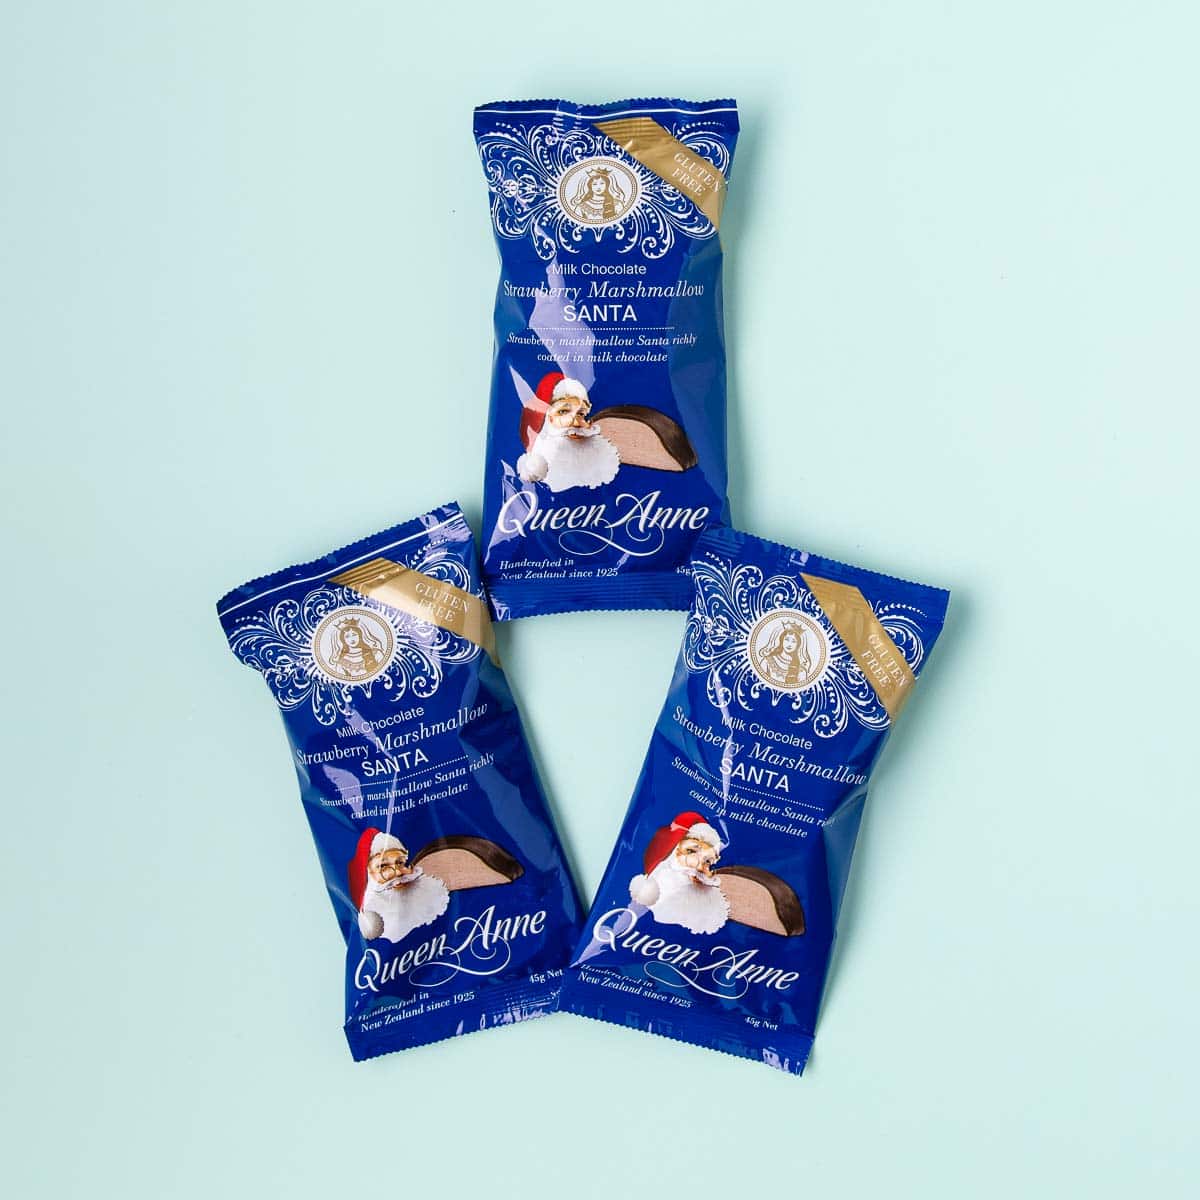 Three Queen Anne marshmallow Santas in blue plastic packaging, on a mint green background.